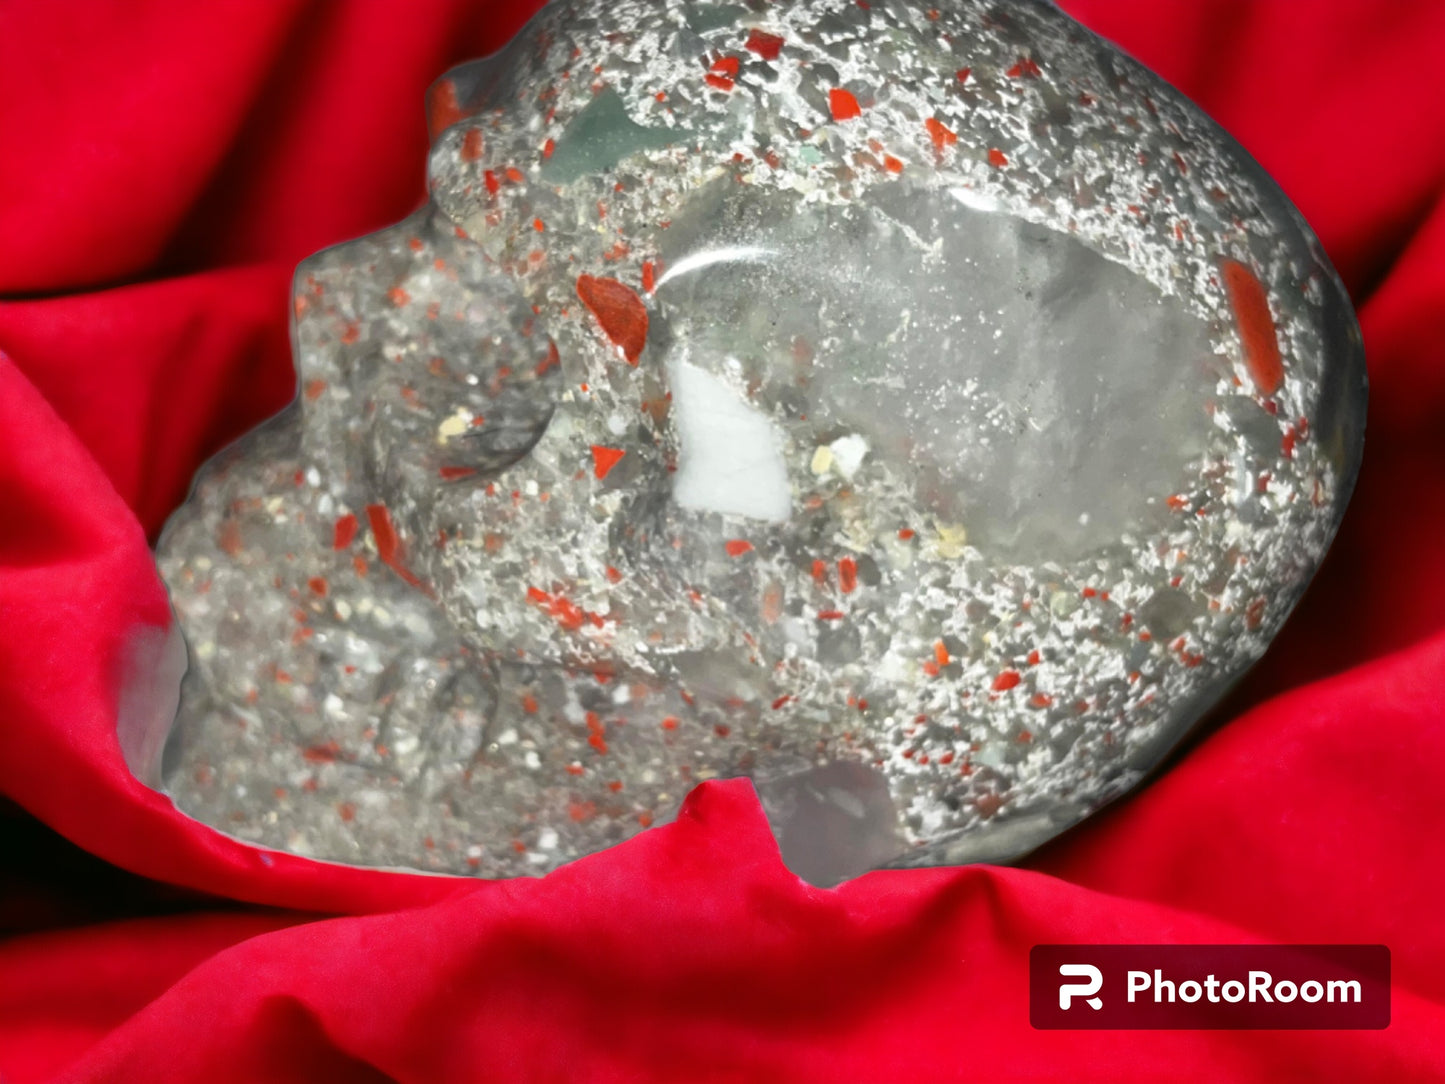 Bloodstone Large skull carving with  High quality